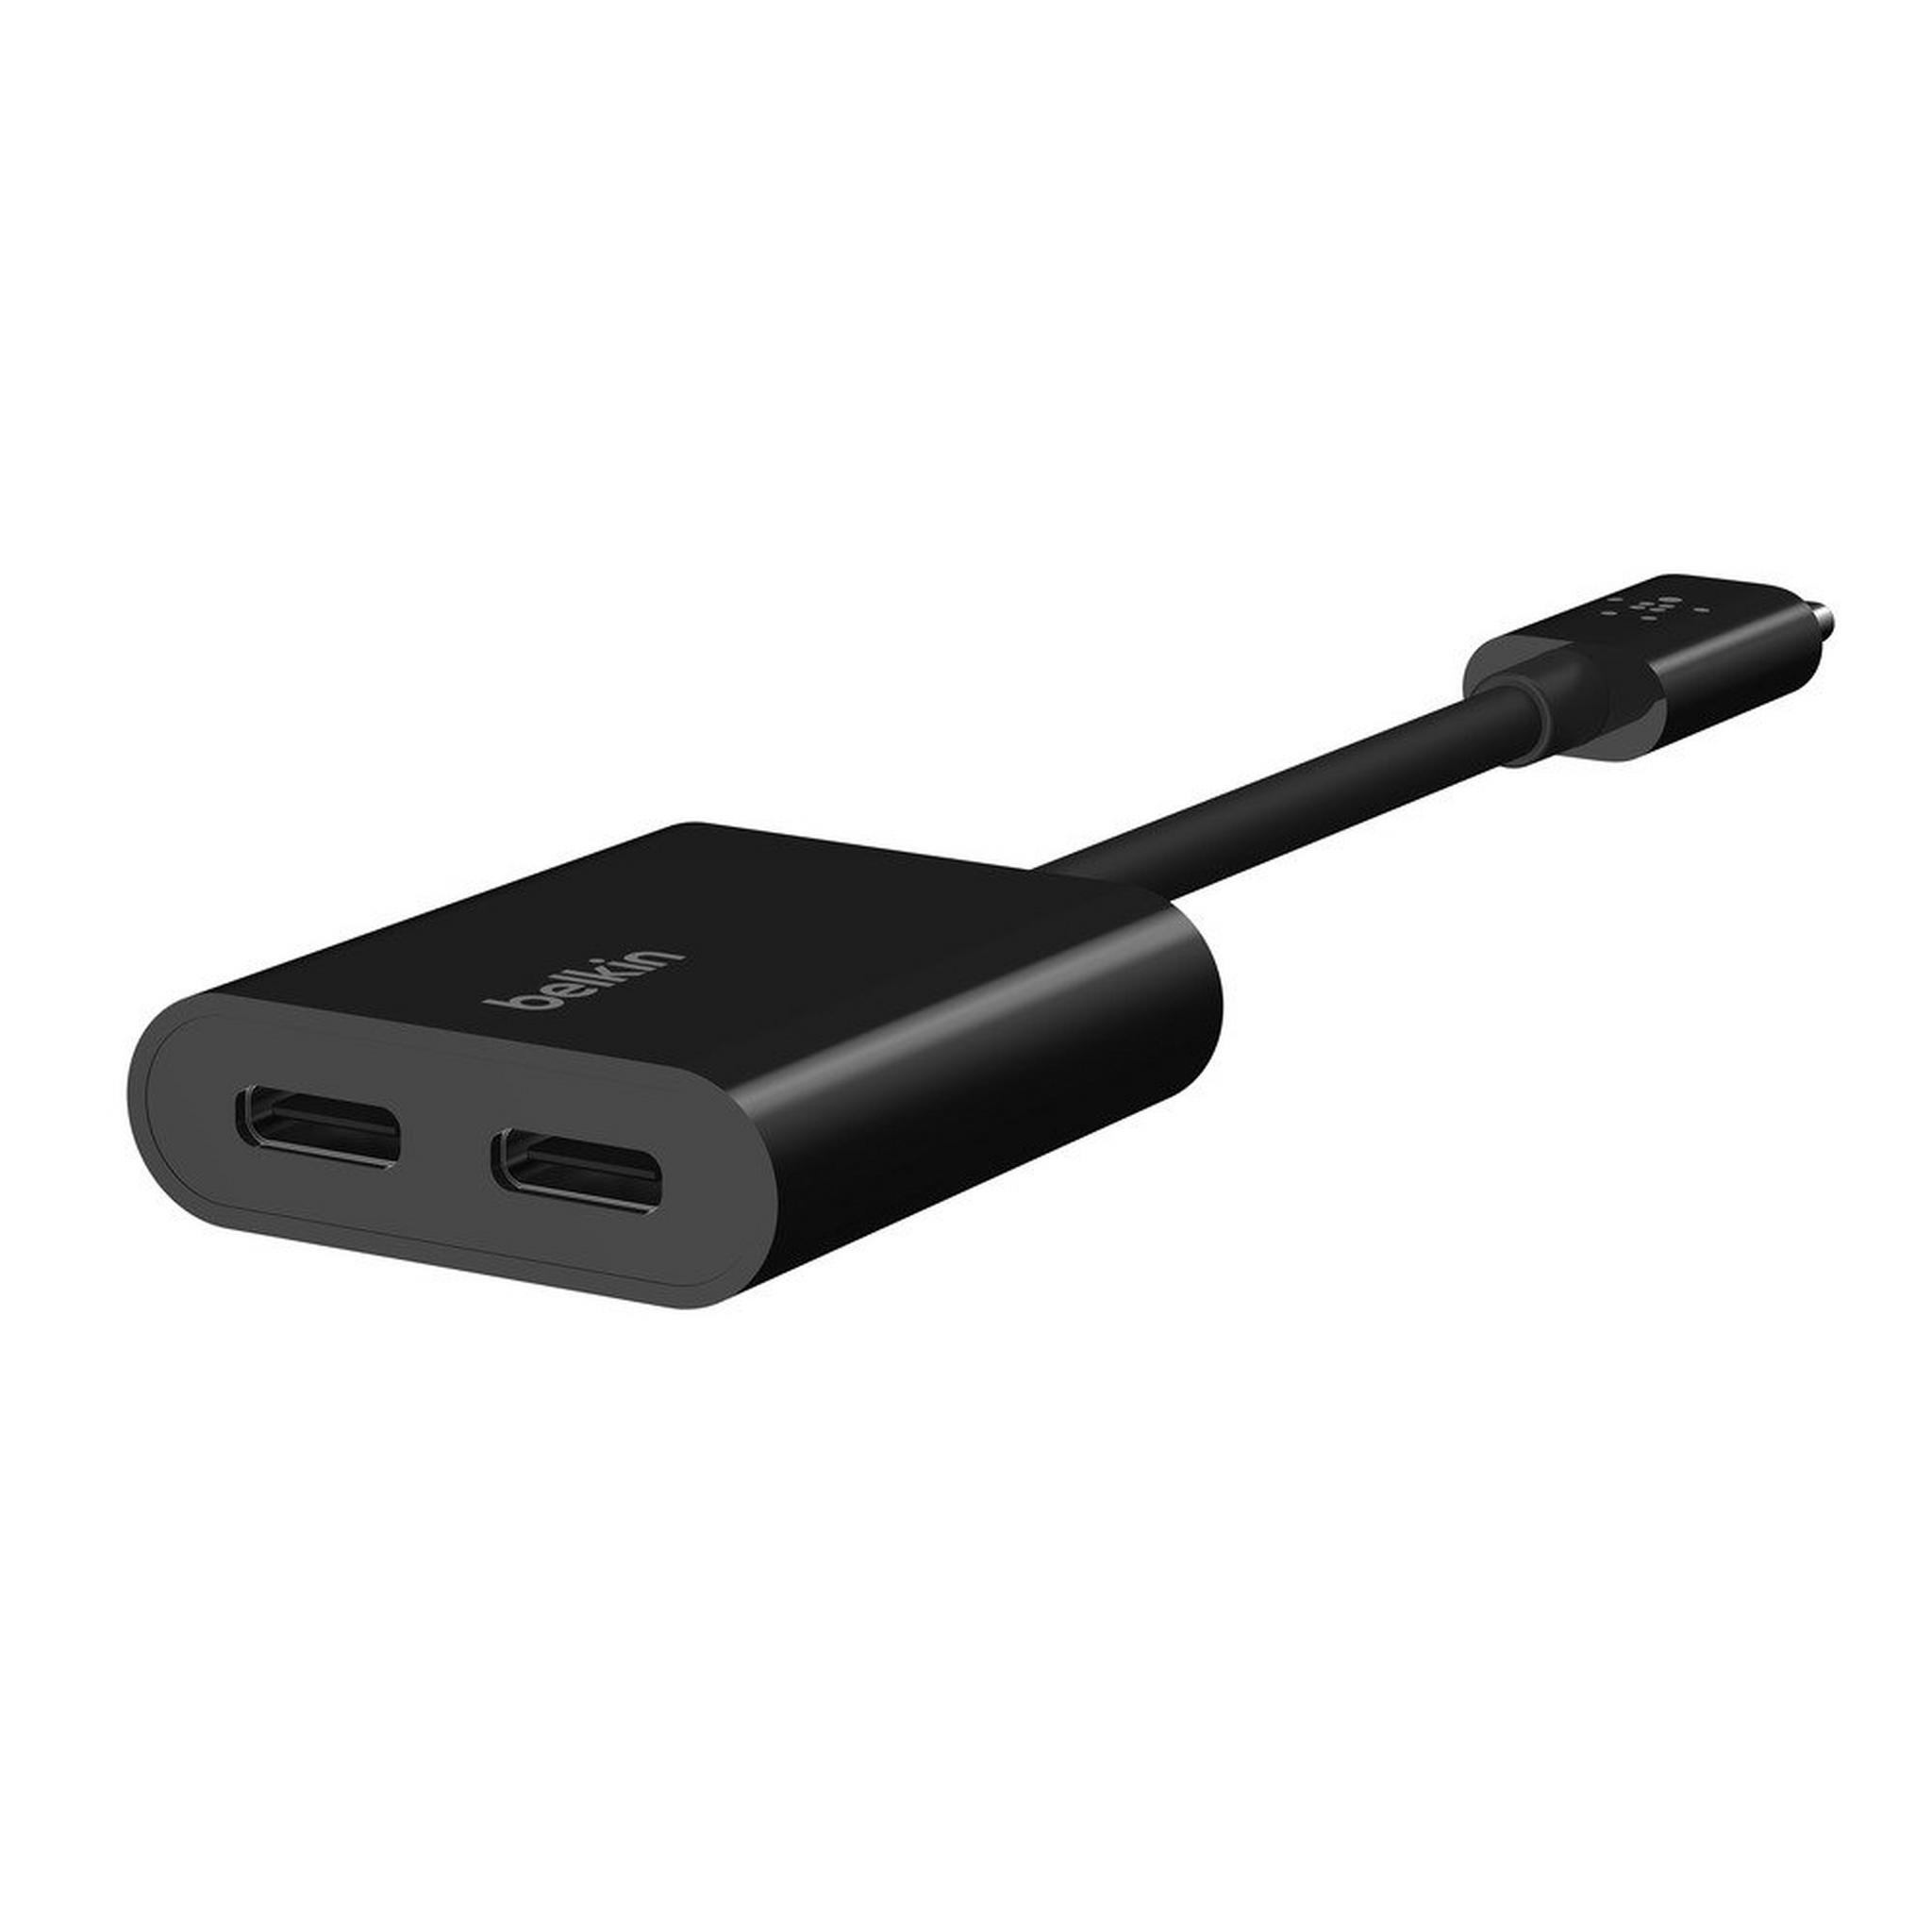 Belkin Connect USB-C Audio + USB-C Fast Charge Adapter Up To 60W